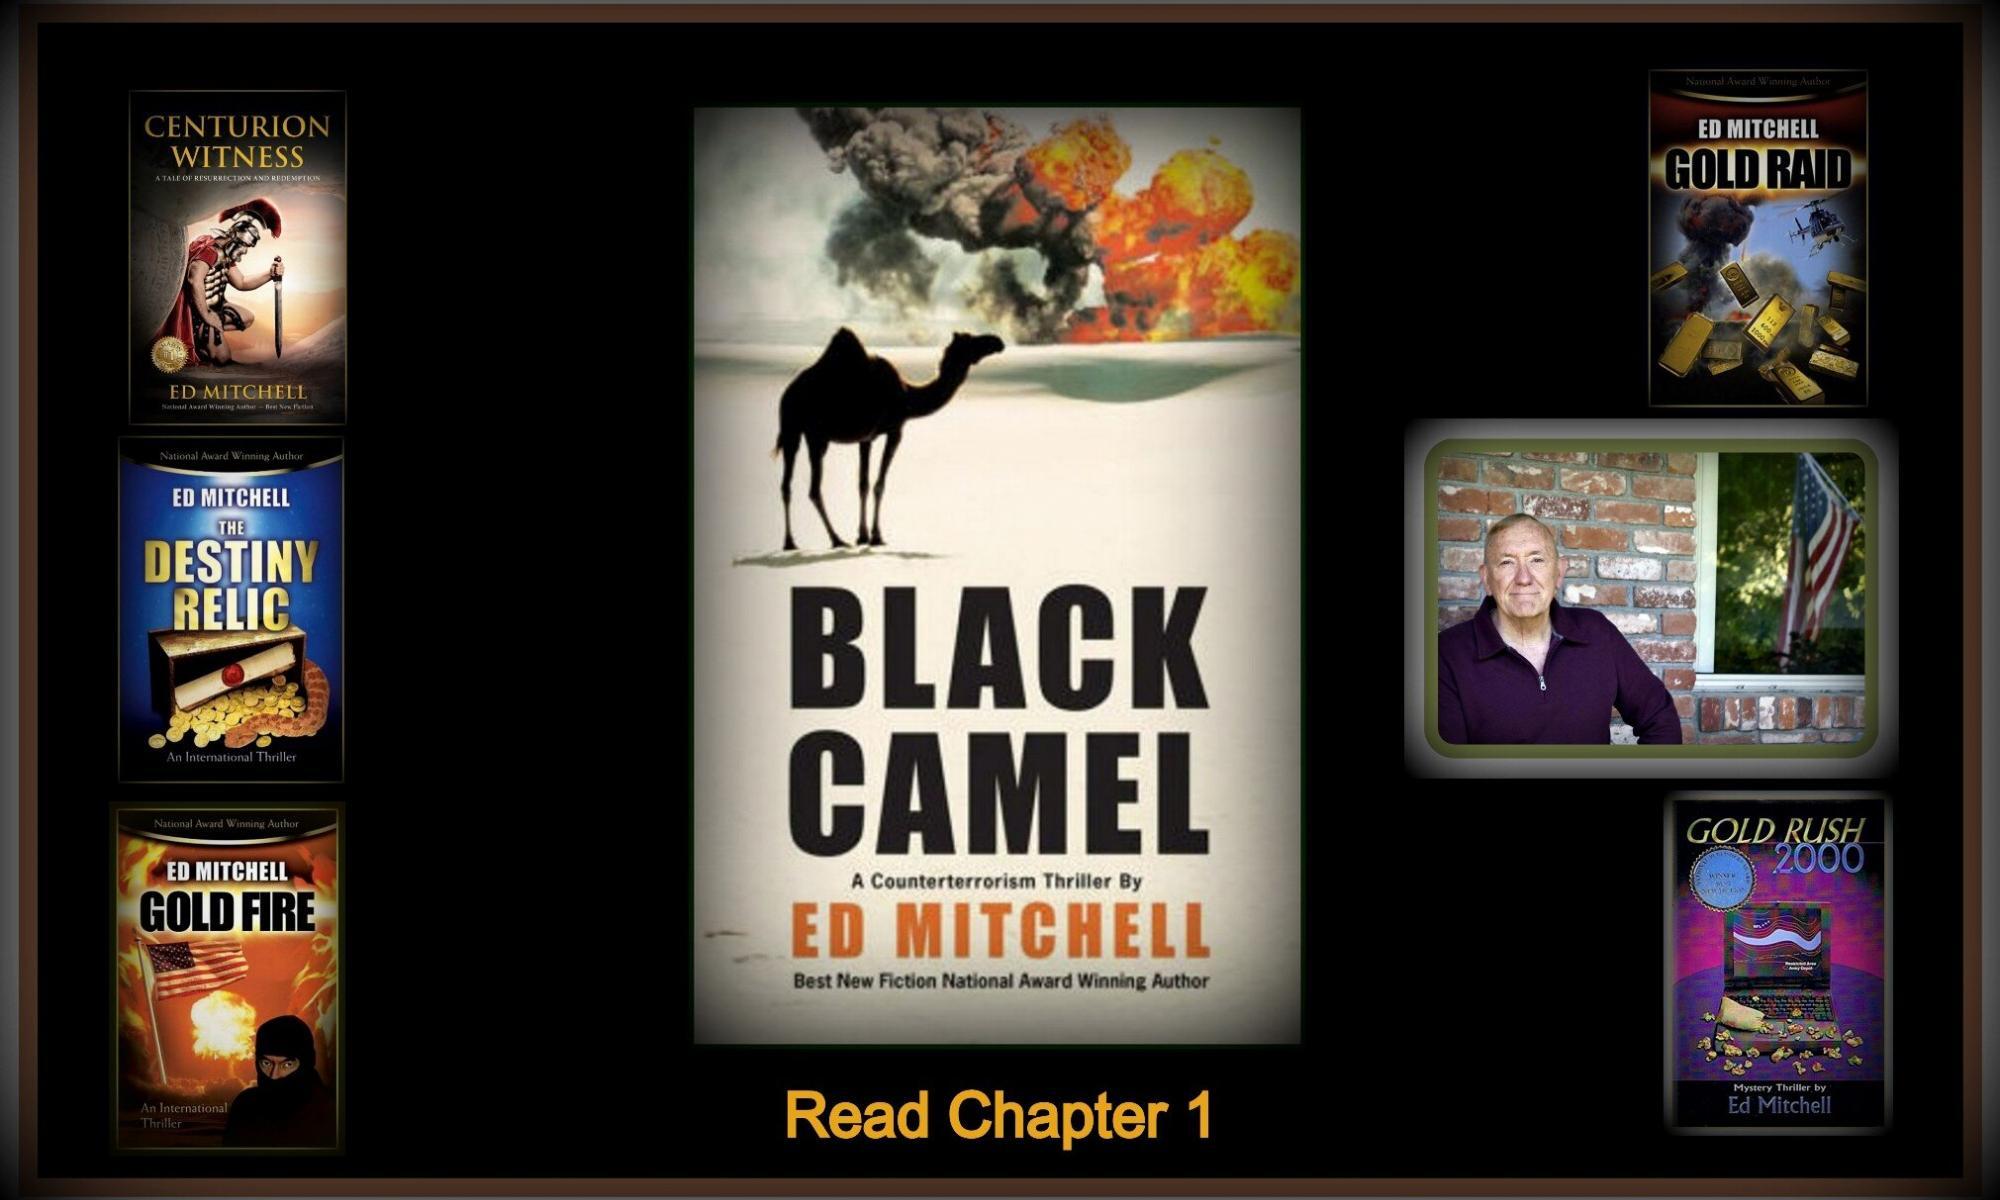 The book Black Camel is center and predominant among the author's other writings.